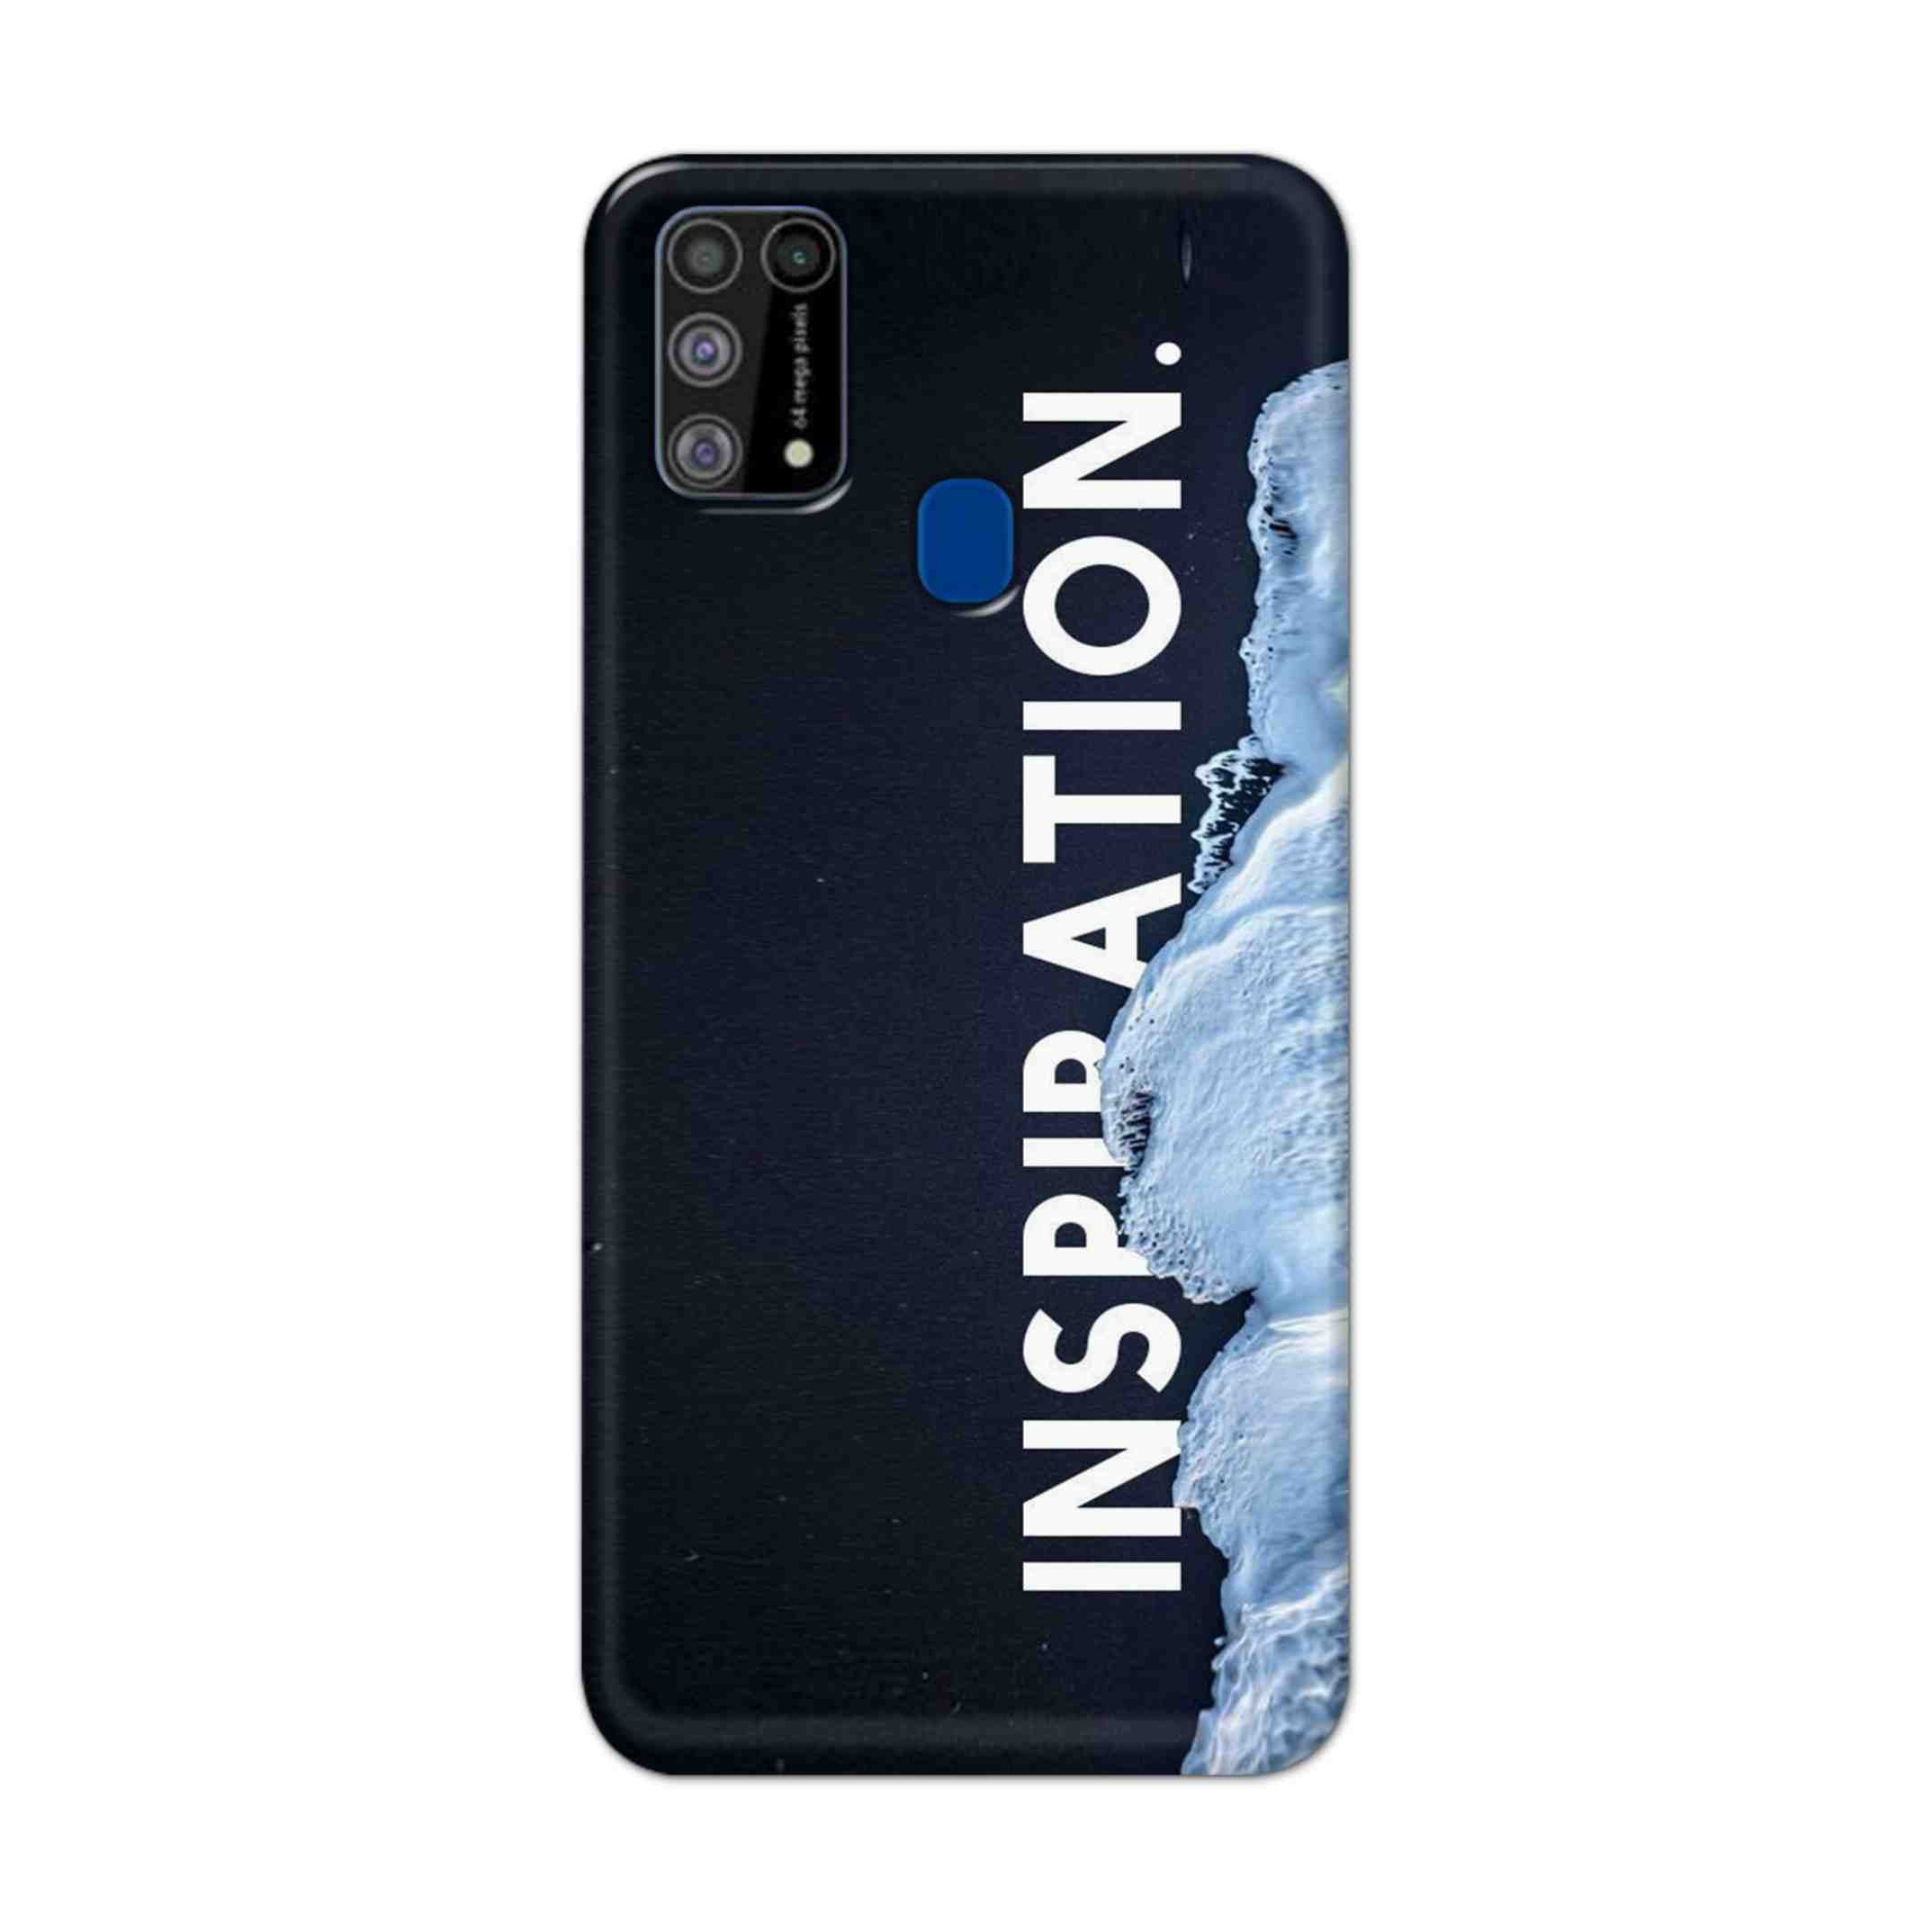 Buy Inspiration Hard Back Mobile Phone Case Cover For Samsung Galaxy M31 Online